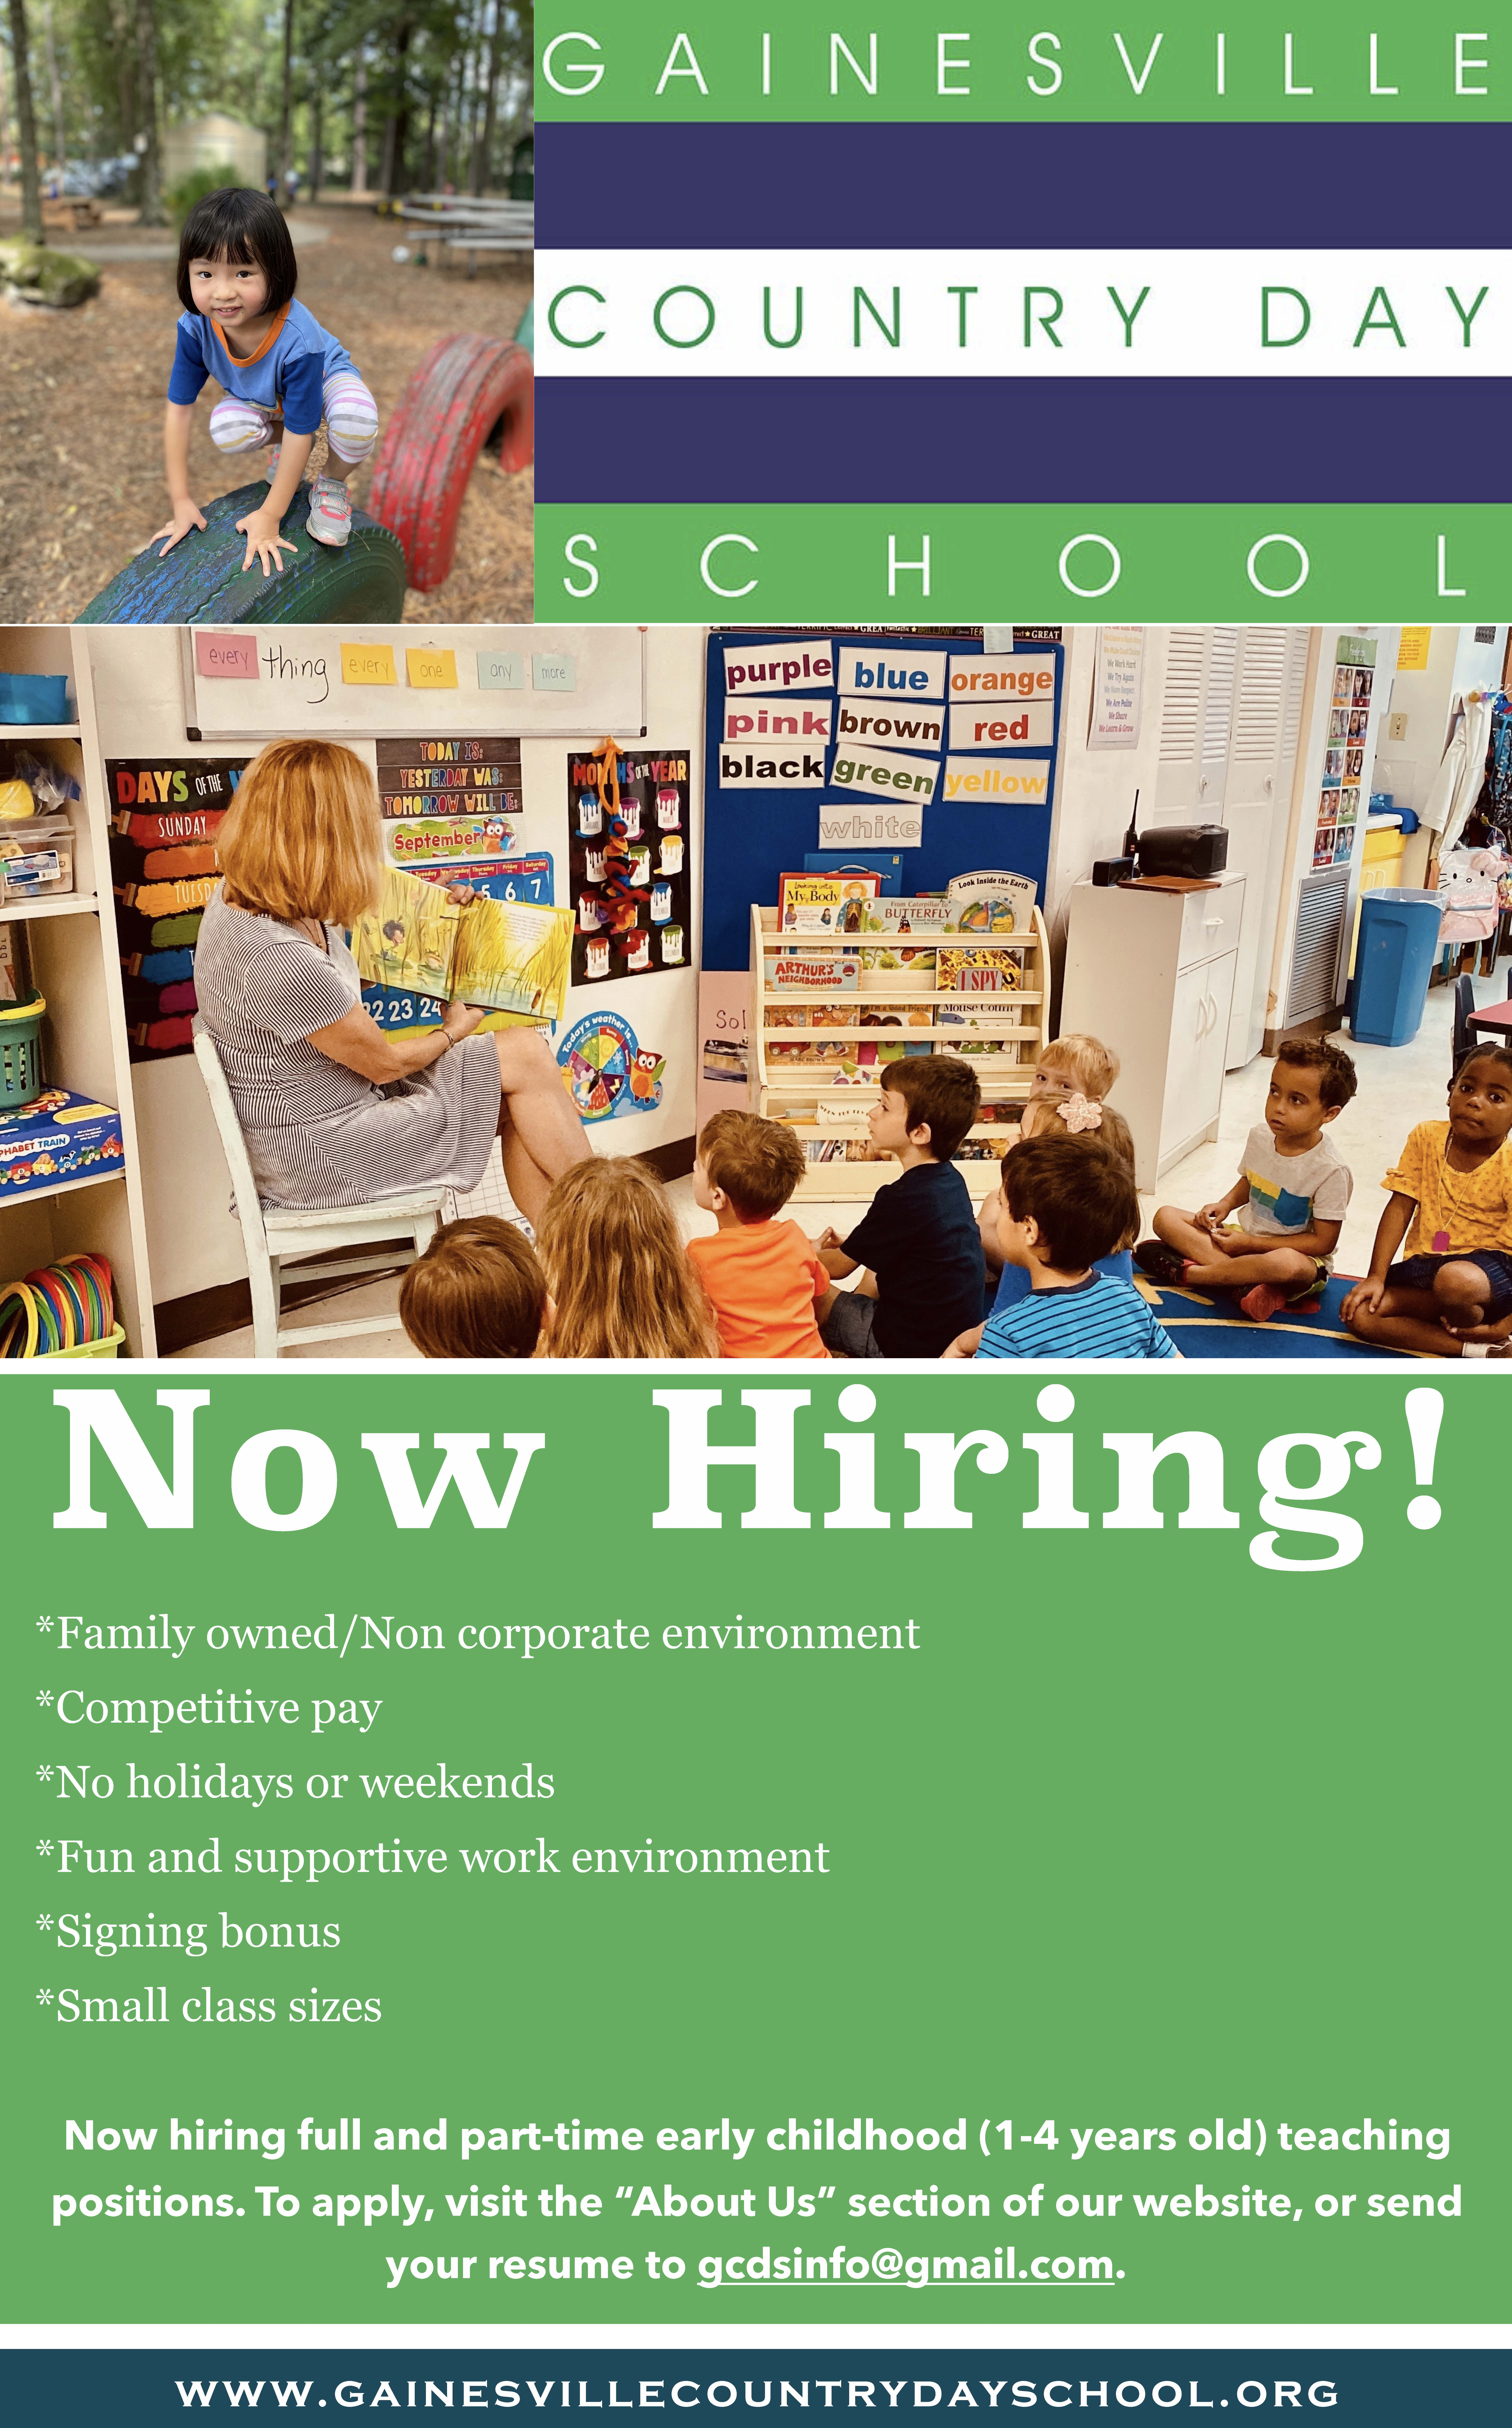 Country Day School Hiring Flyer - Early Childhood Teaching Positions